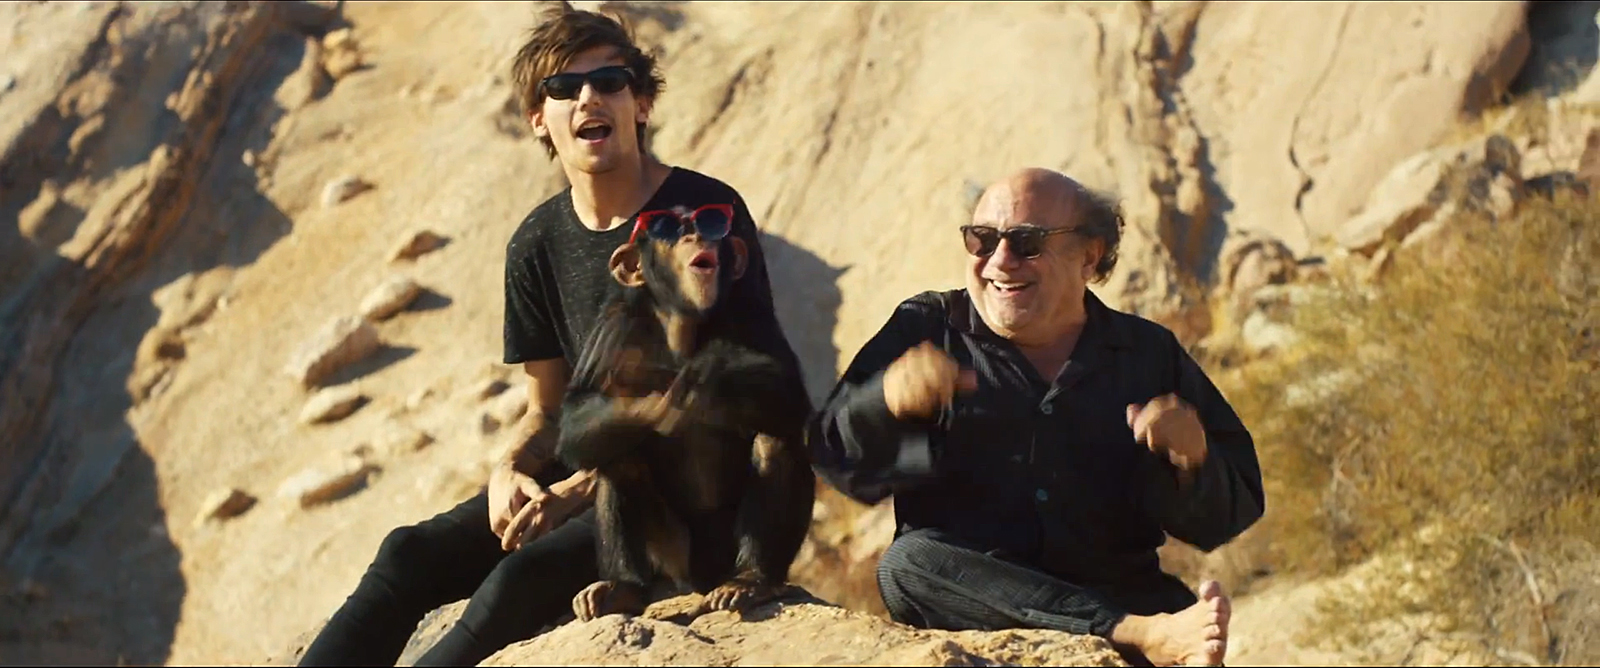 One Direction – Steal My Girl